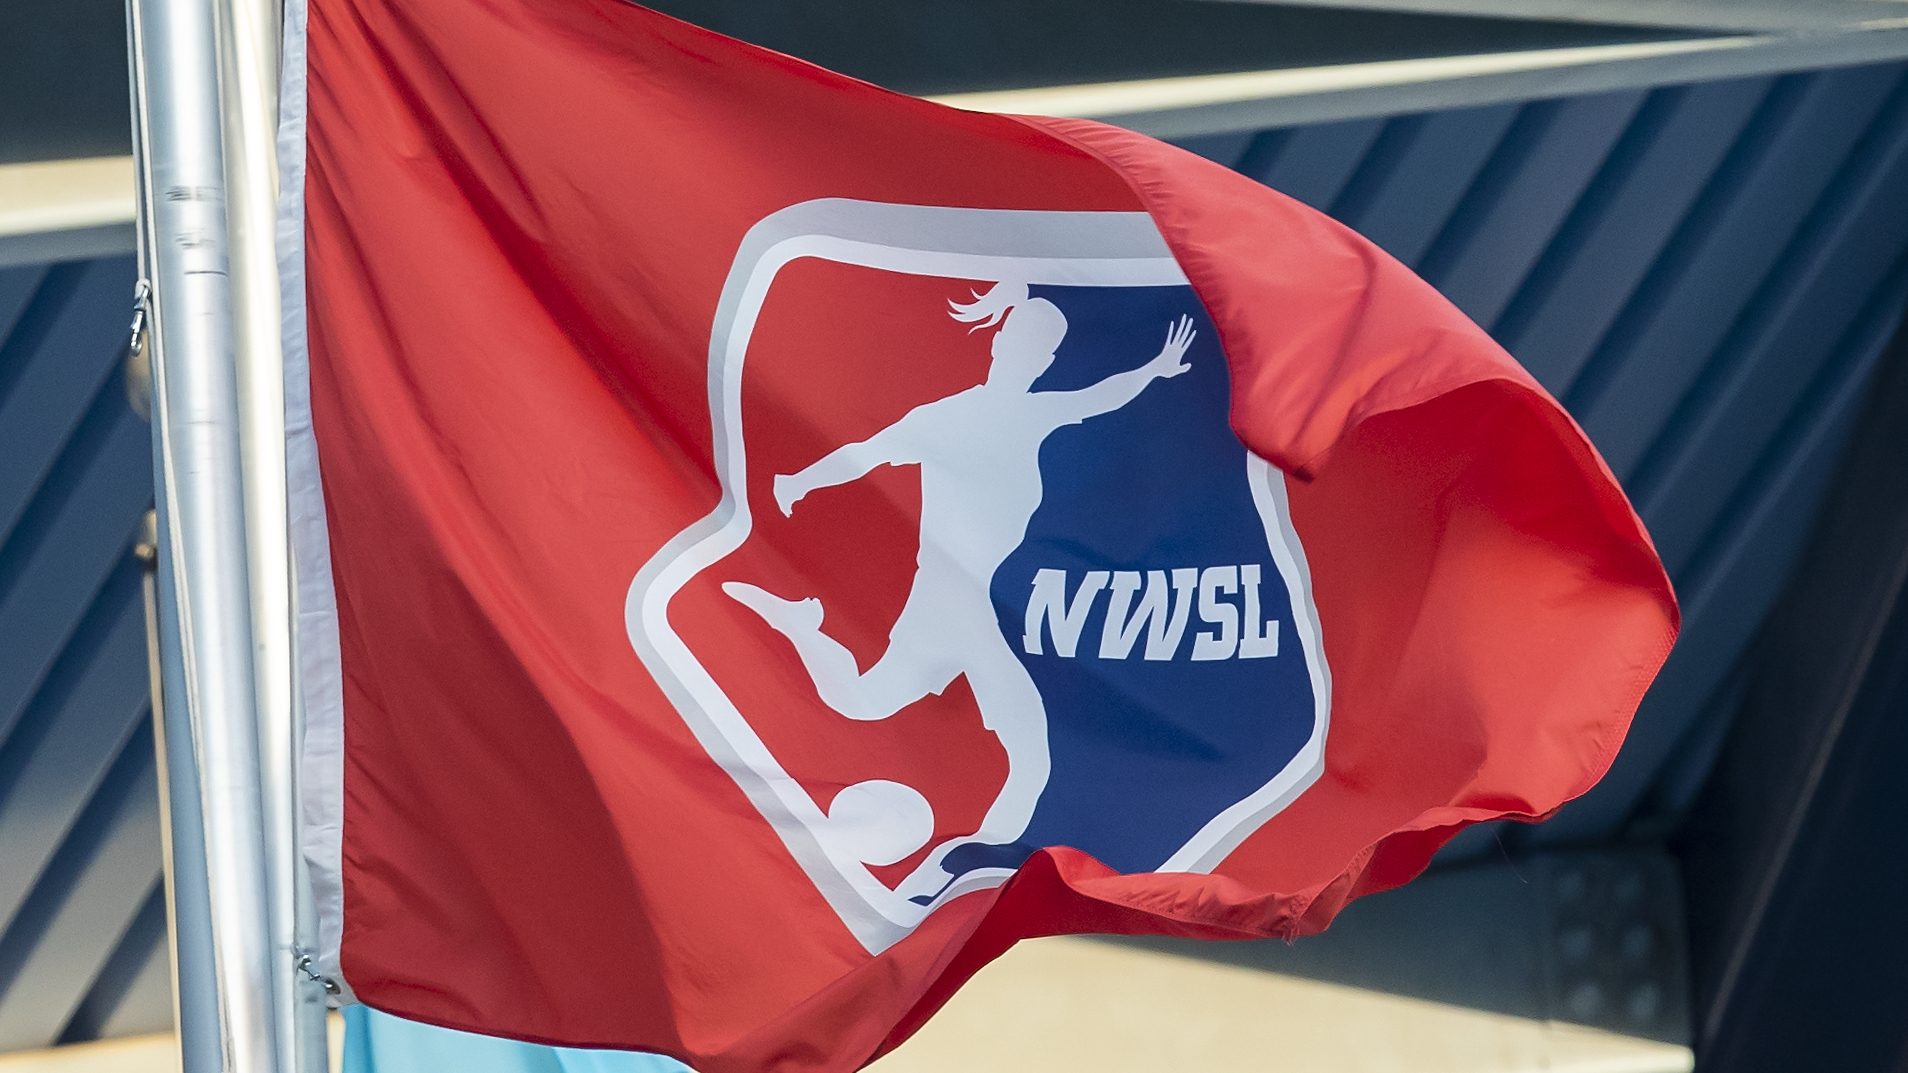 The NWSL flag waves in the wind during the match between the Kansas City Current and the Chicago Red Stars on Saturday, June 18, 2022 at Childrens Mercy Park in Kansas City, KS.